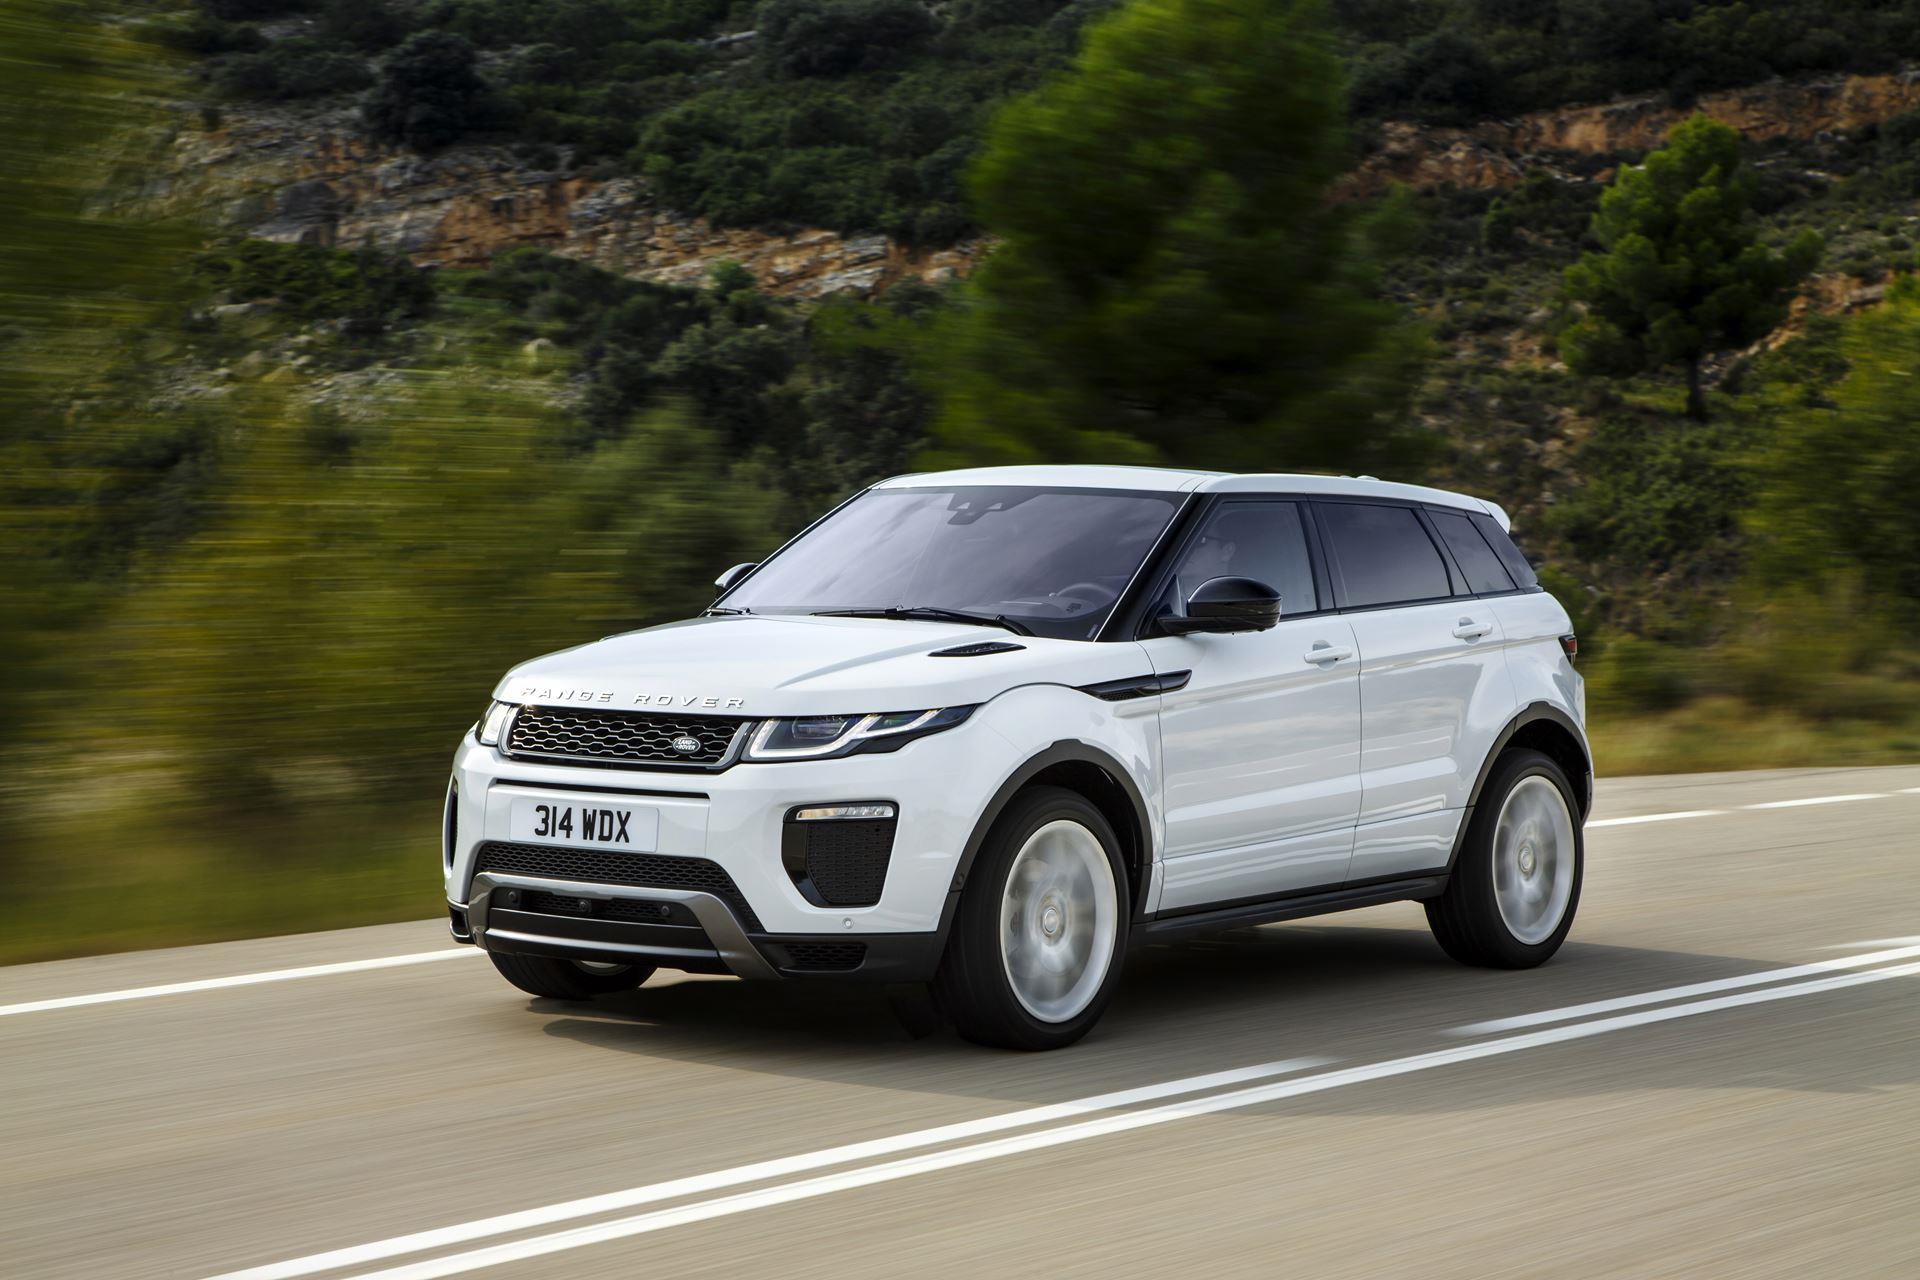 2018 Land Rover Range Rover Evoque News and Information